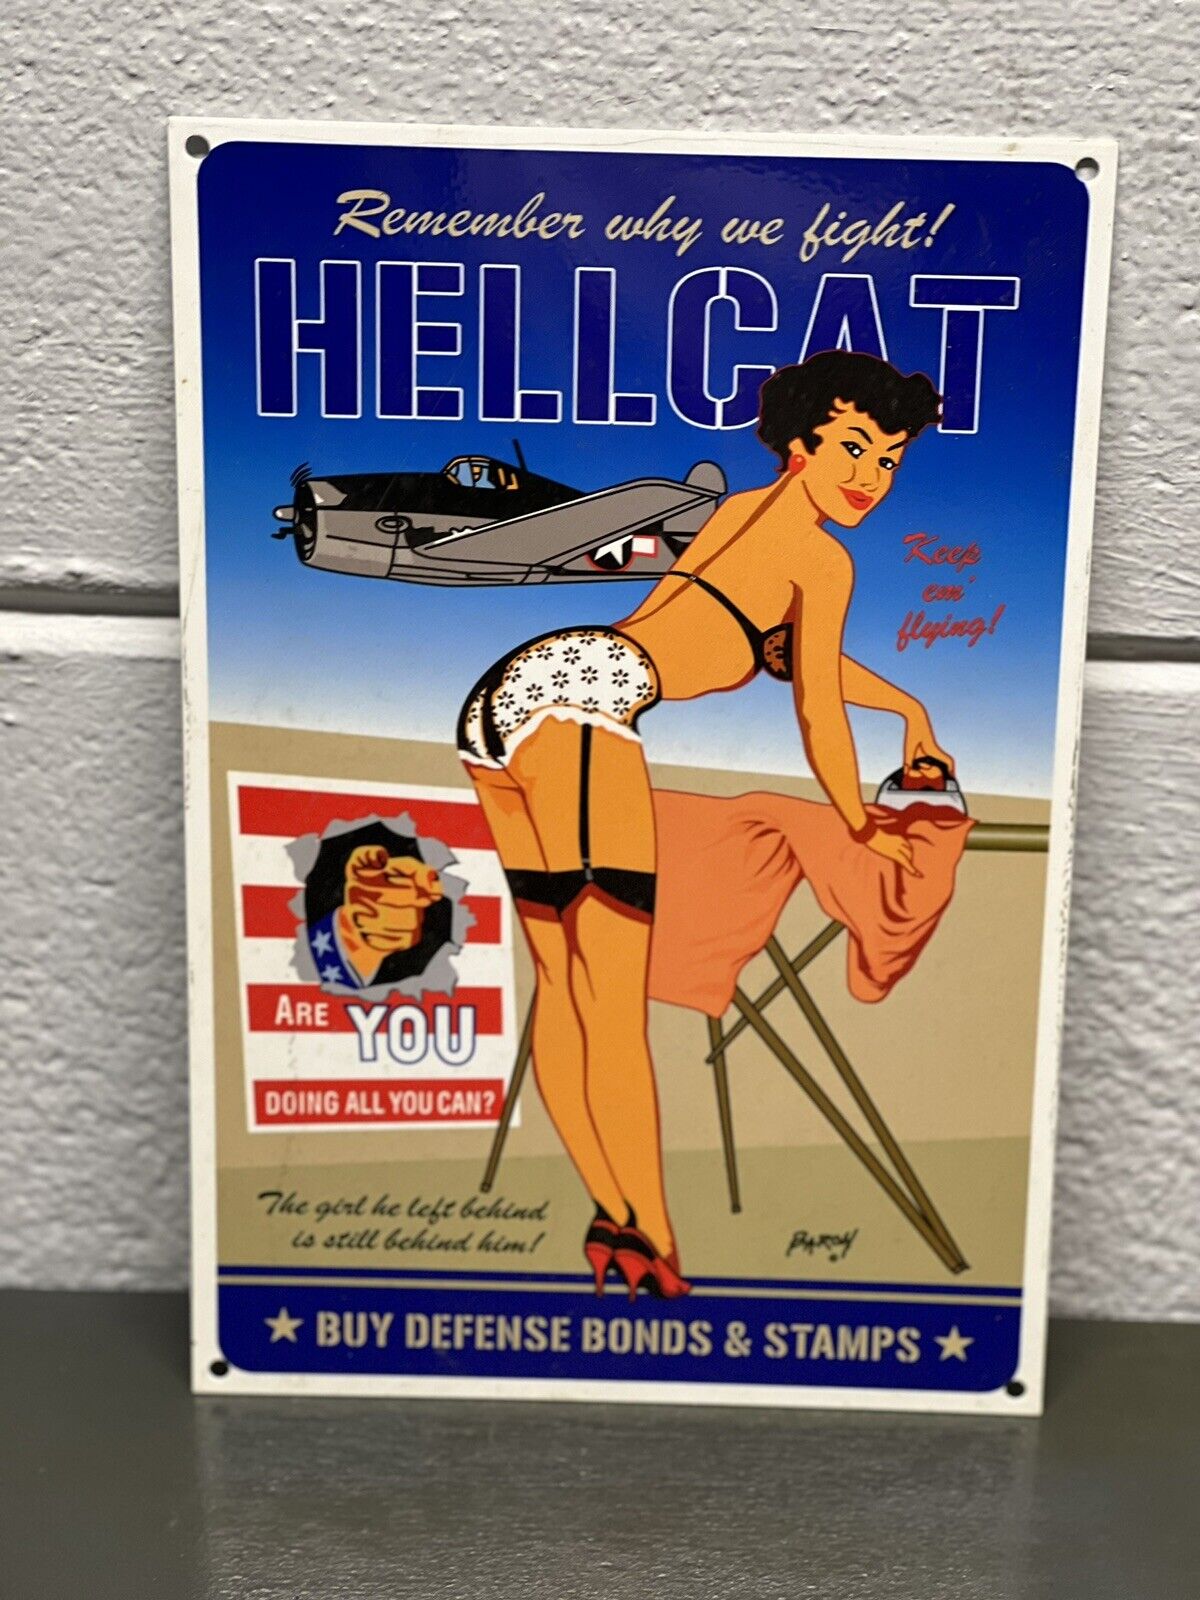 Hellcat Bonds Stamps Metal Sign Pin Up America Post Office Airplane Helicopter